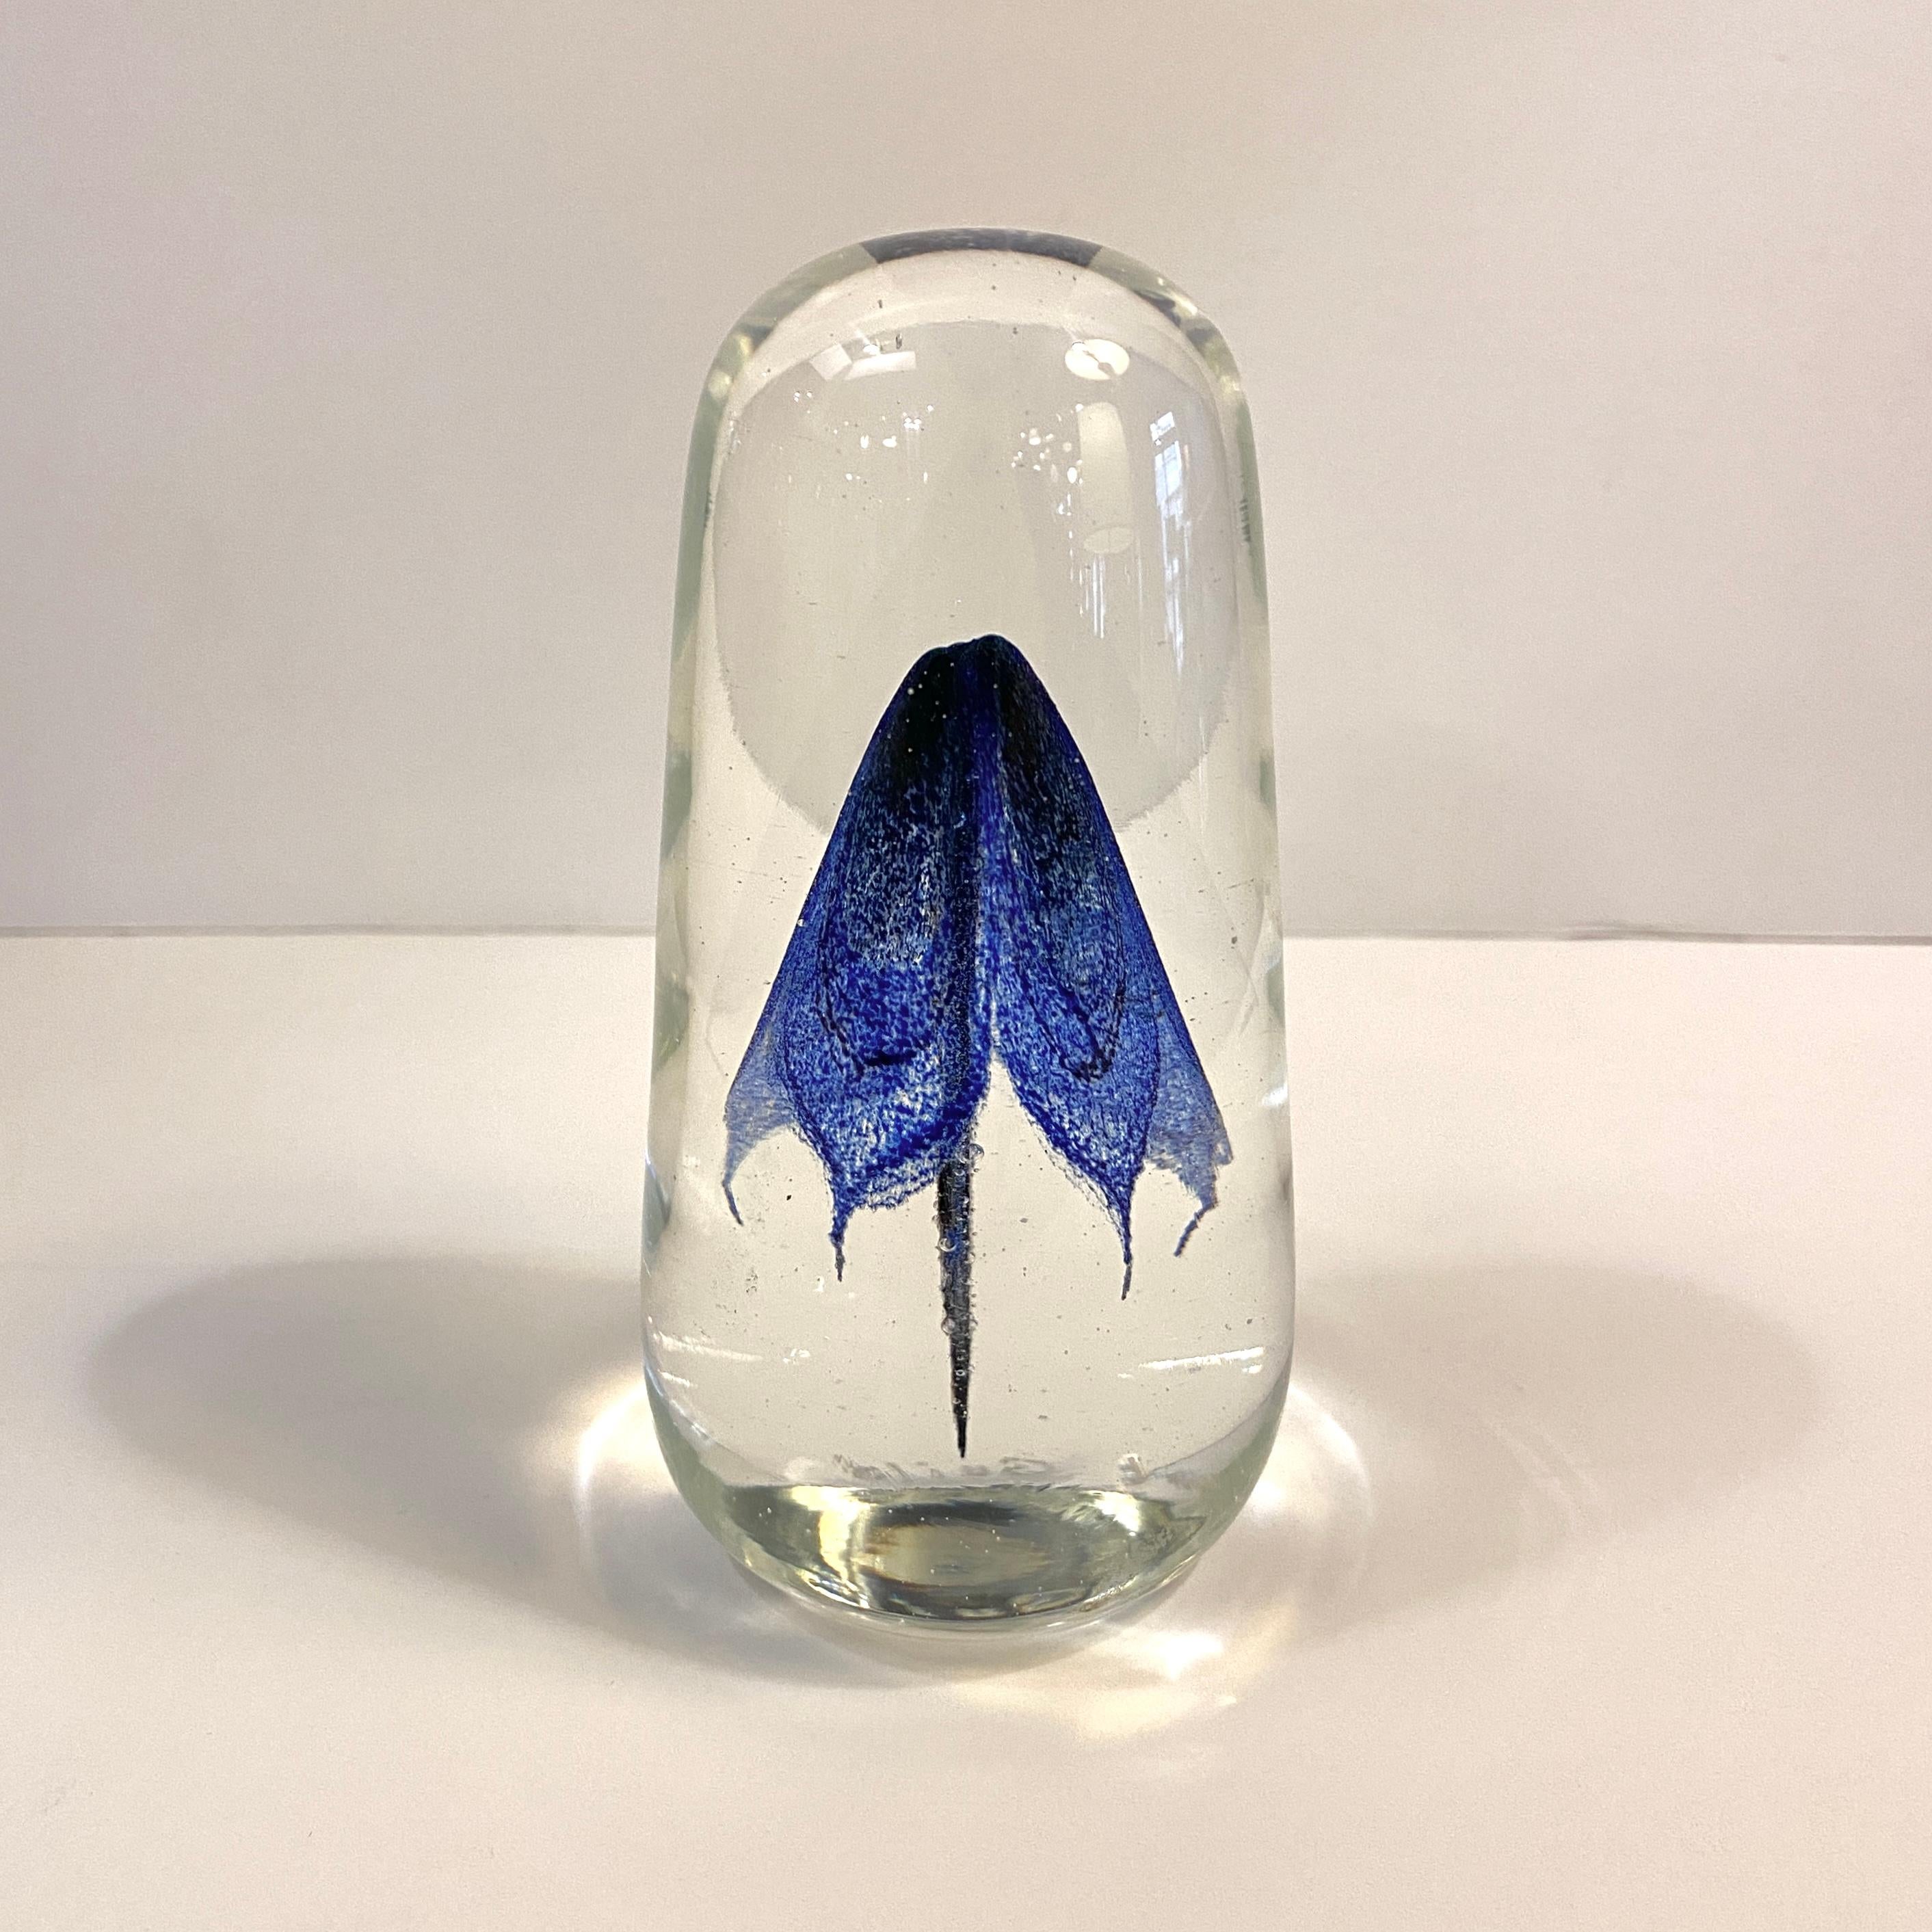 Artisan-made, hand-blown, art glass paperweight by Rochester Folk Art Guild features a graceful, cobalt blue form resembling a jellyfish or a flower encased in a clear glass tall oblong shape that tapers on top. Signed and dated 1983.  It's a